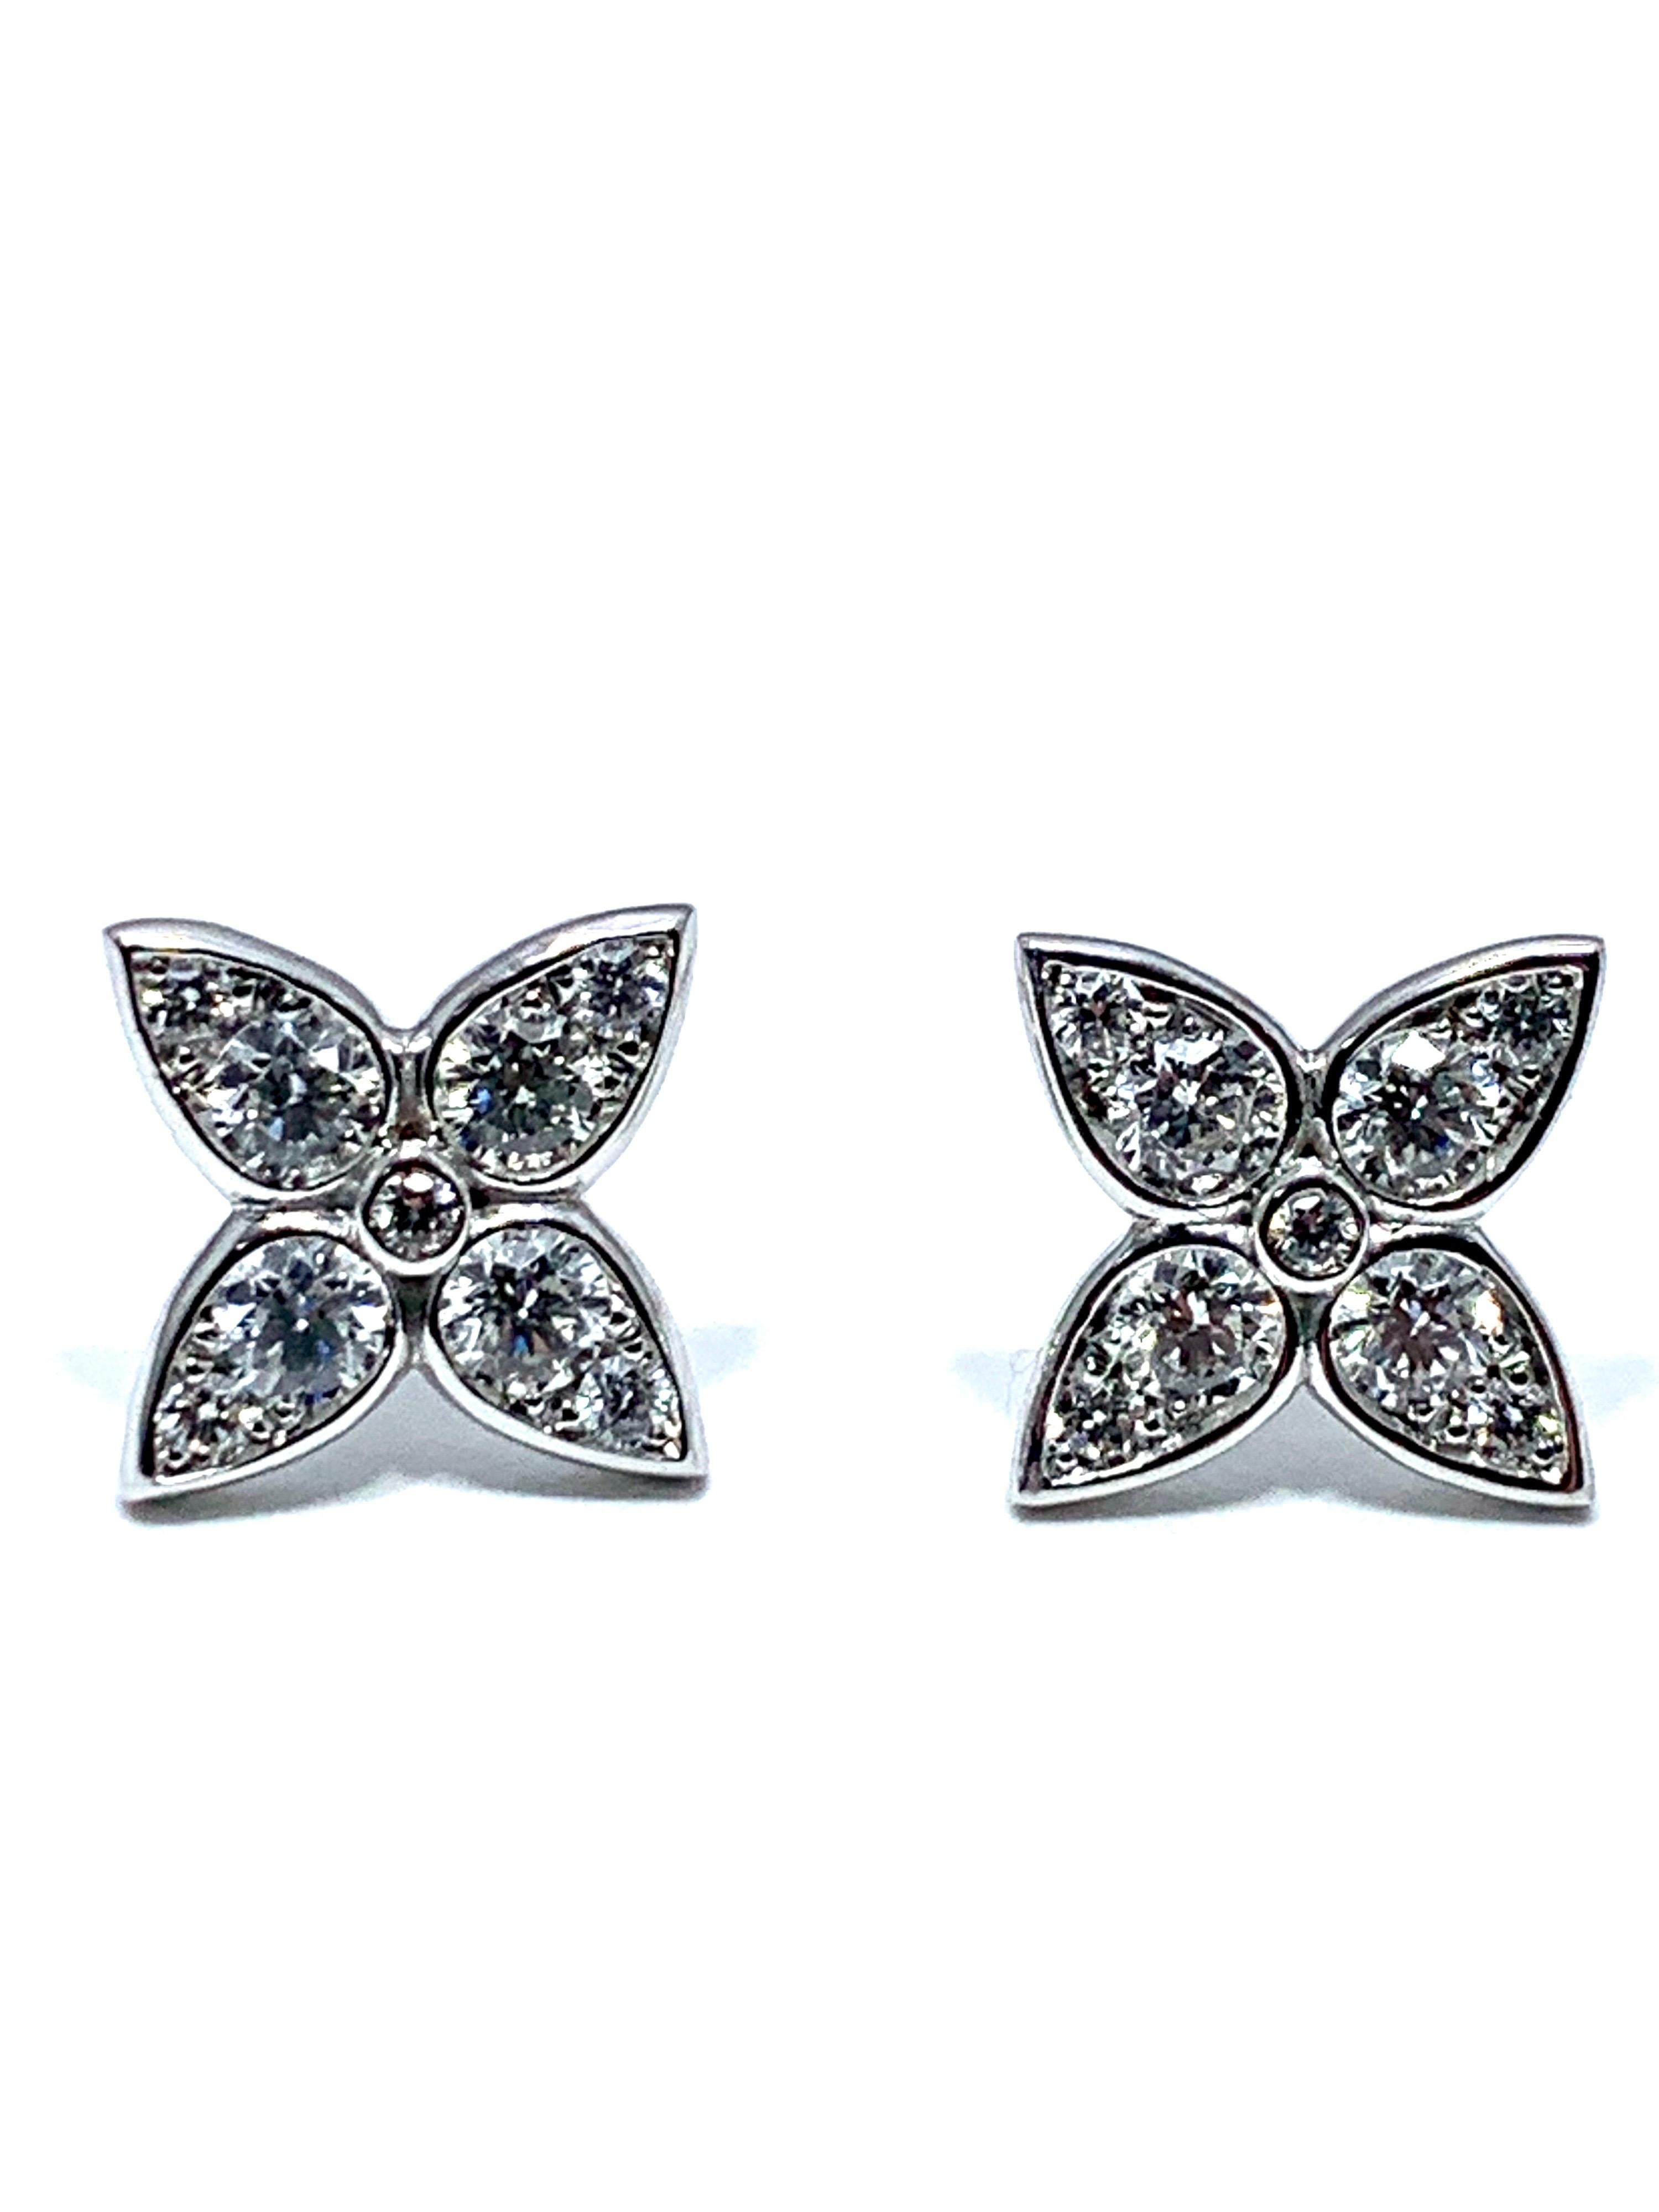 Handcrafted in Italy by Mariani Gioielli this pair of round brilliant Diamond and 18 karat white gold stud earrings are simply stunning.  The 18 Diamonds have a total weight of 1.02 carats.  The Diamonds are graded as E/F color, VVS2 clarity.  The